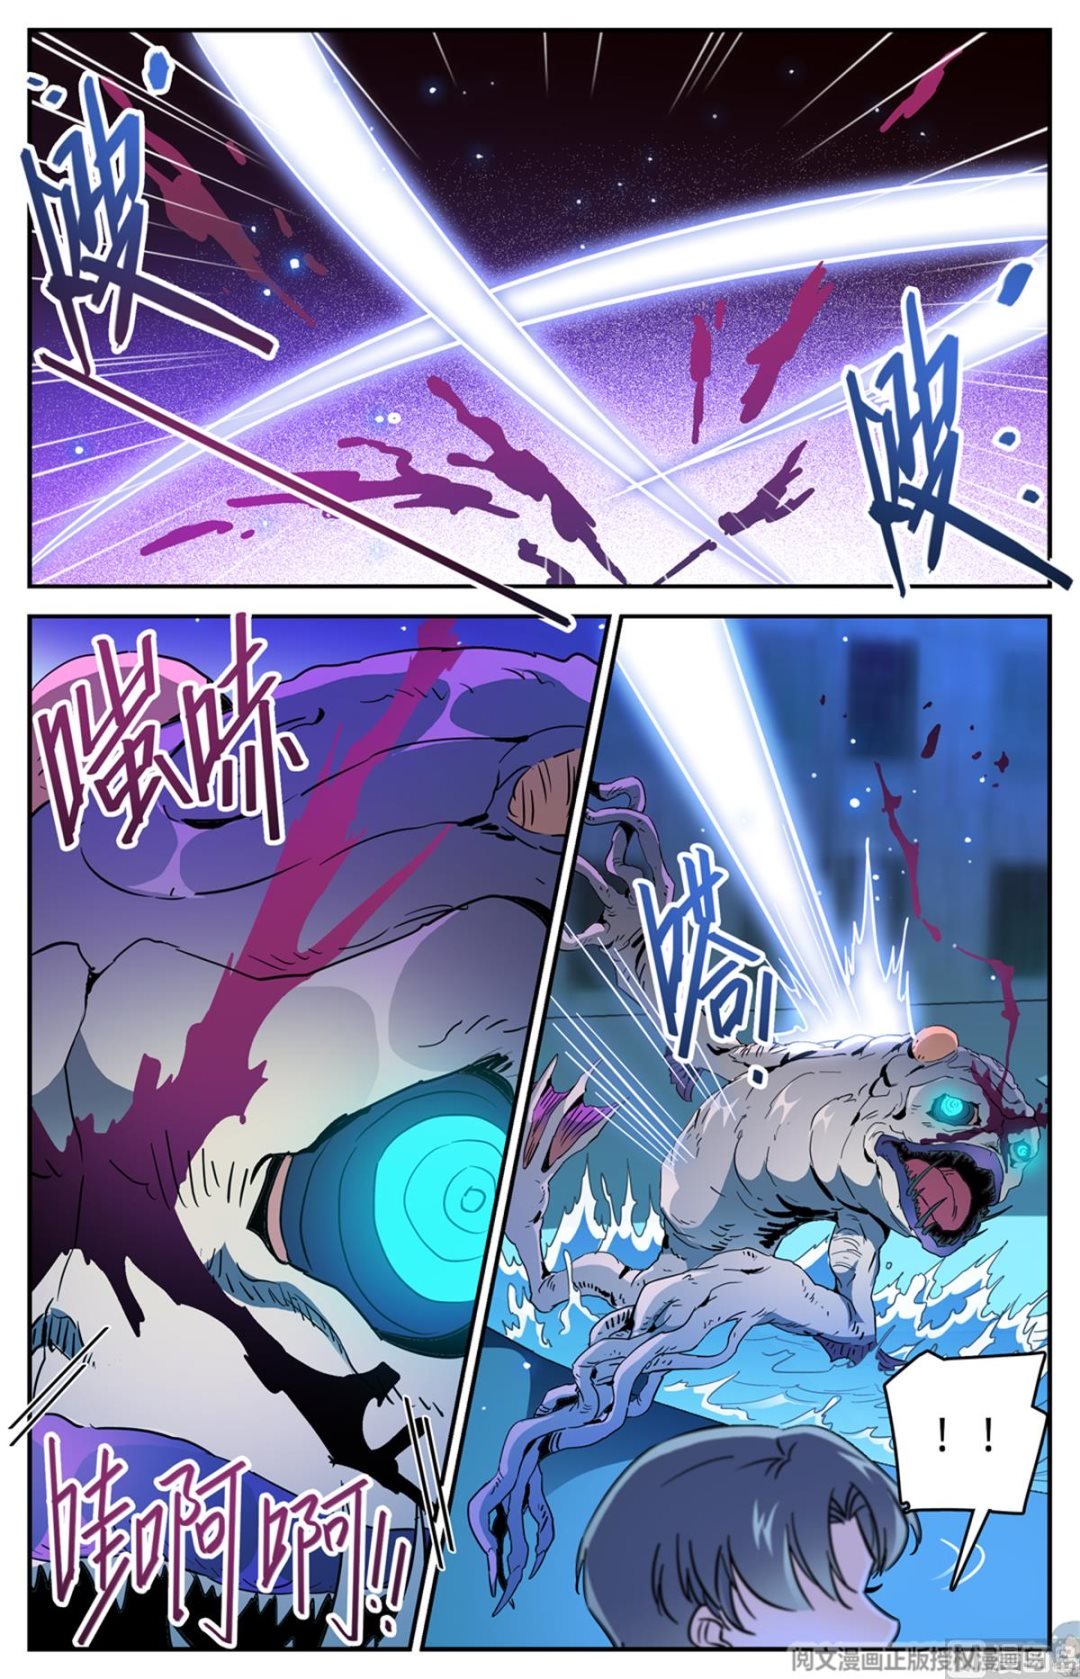 Versatile Mage chapter 516 page 10